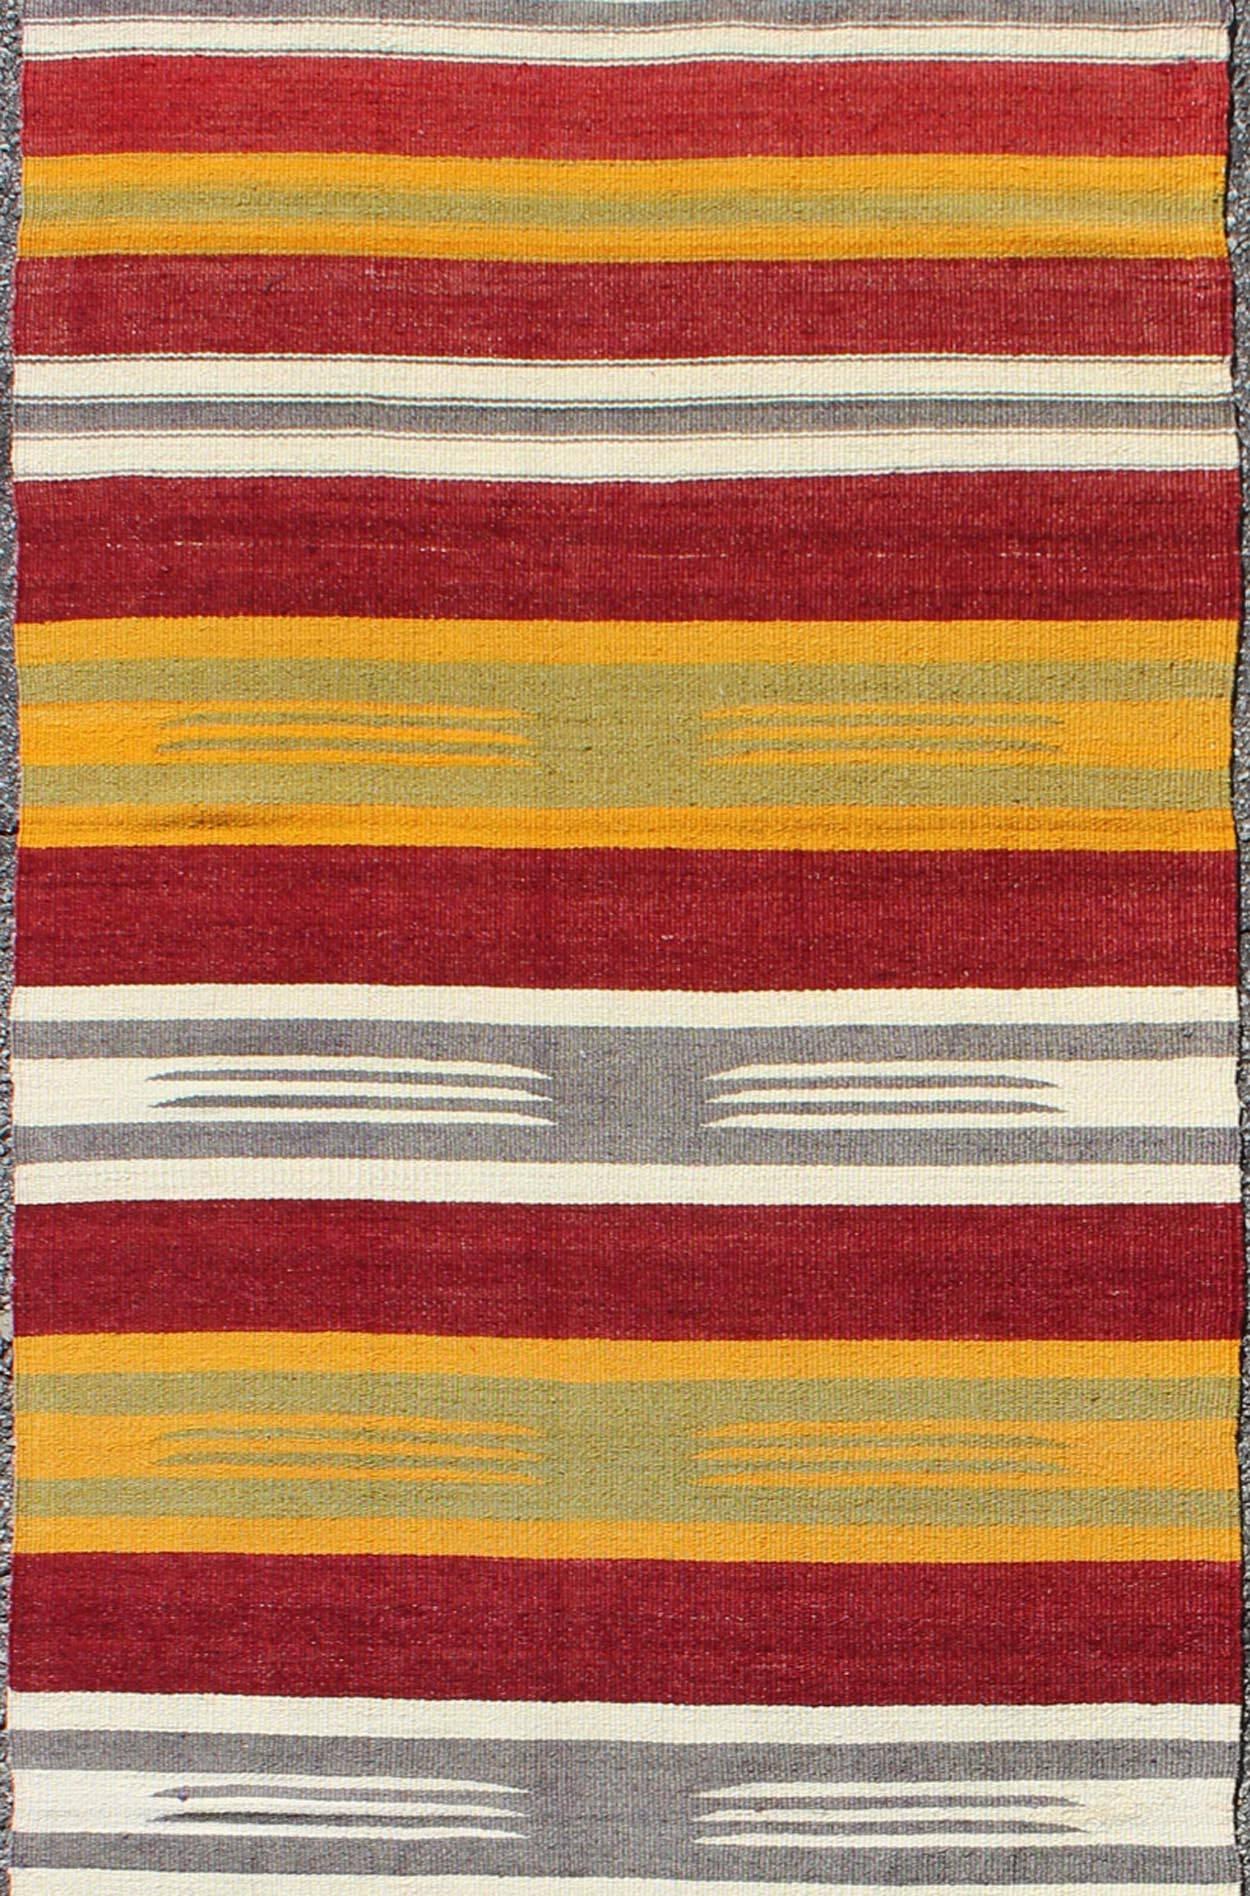 Vintage Turkish Kilim Runner with Stripes in Red, Green, Yellow, Ivory and Gray In Excellent Condition For Sale In Atlanta, GA